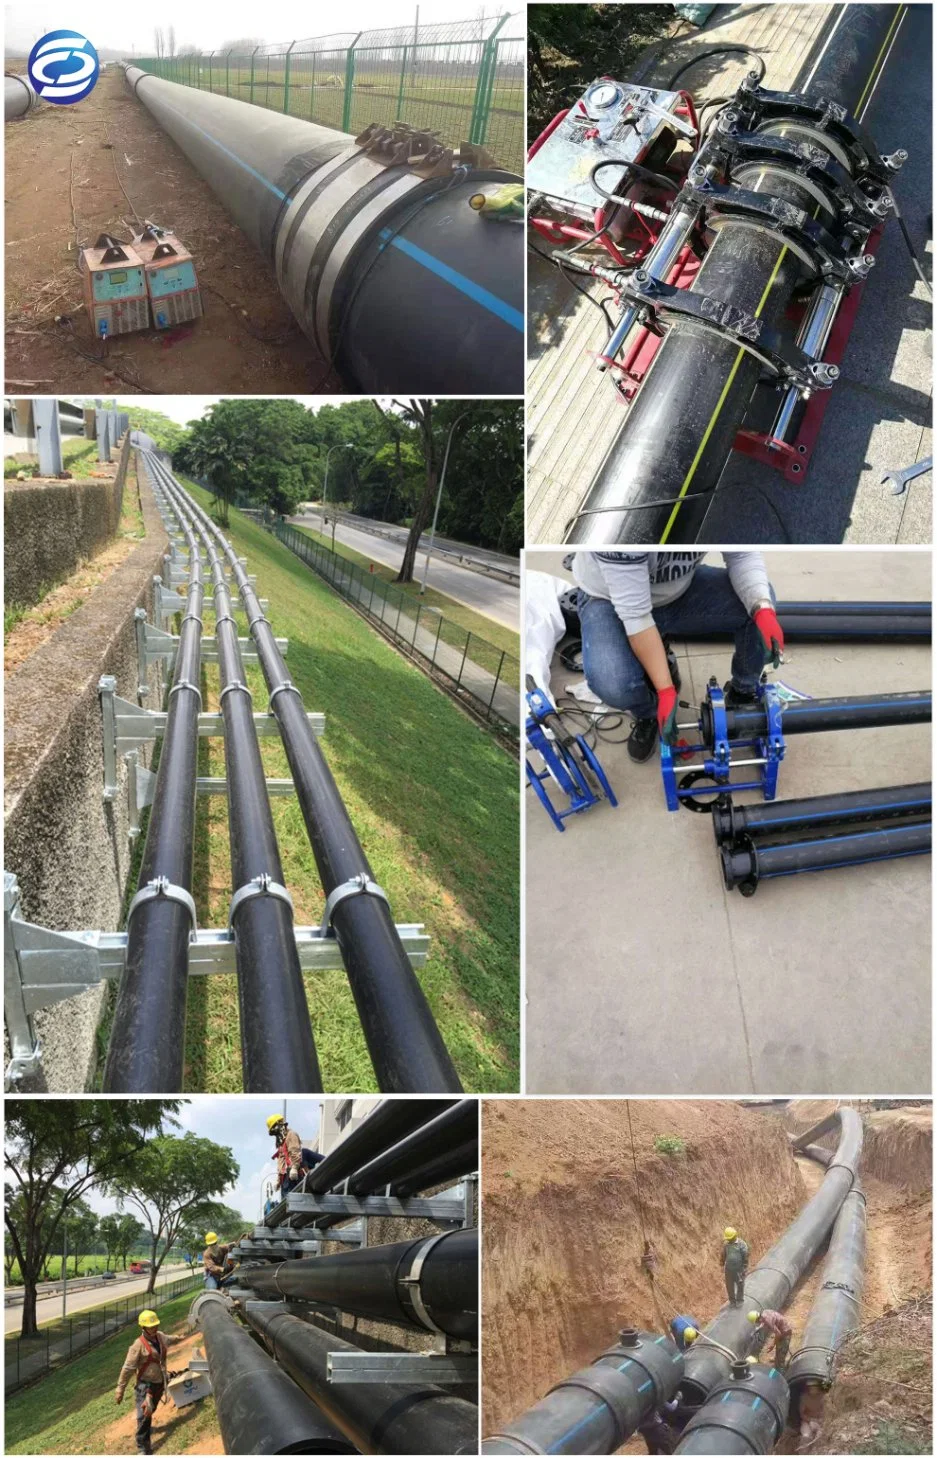 Promotional Pressure Pipe 1.6MPa 9inches HDPE Pipe 225mm Water Pipe for Water Treatment, Industrial Pipe System